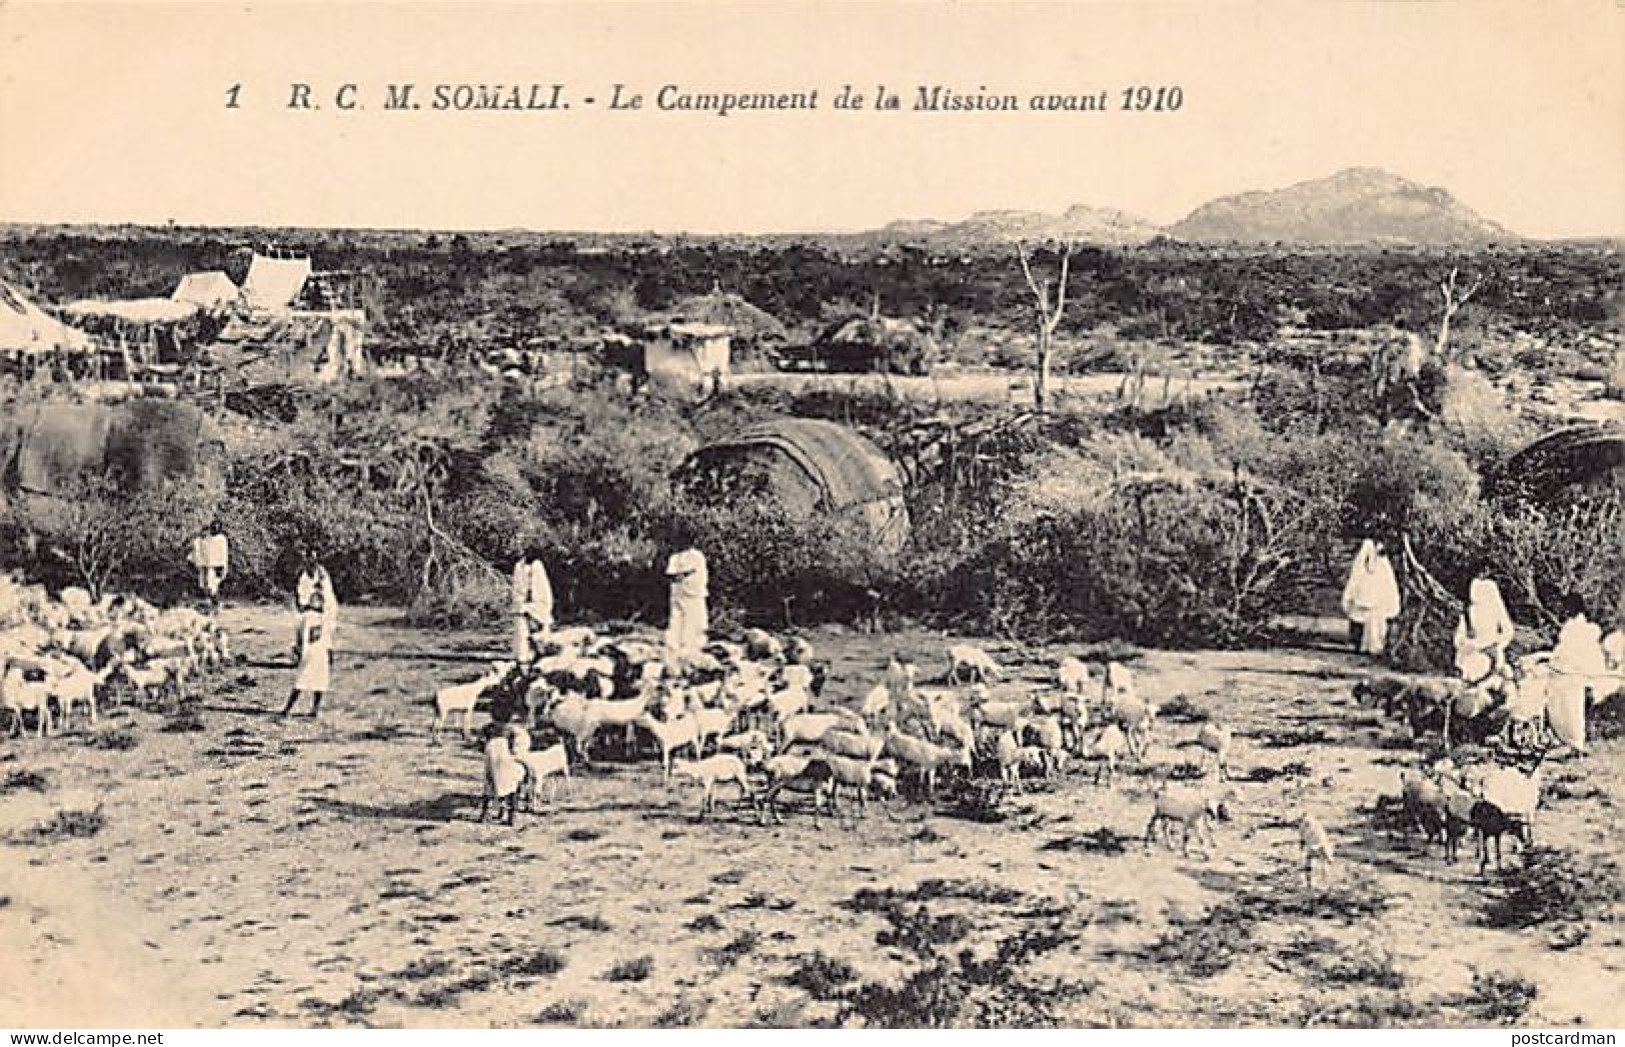 Somalia - BERBERA - The Camp In Front Of The Mission In 1910 - Publ. Roman Catholic Mission 1 - Somalië